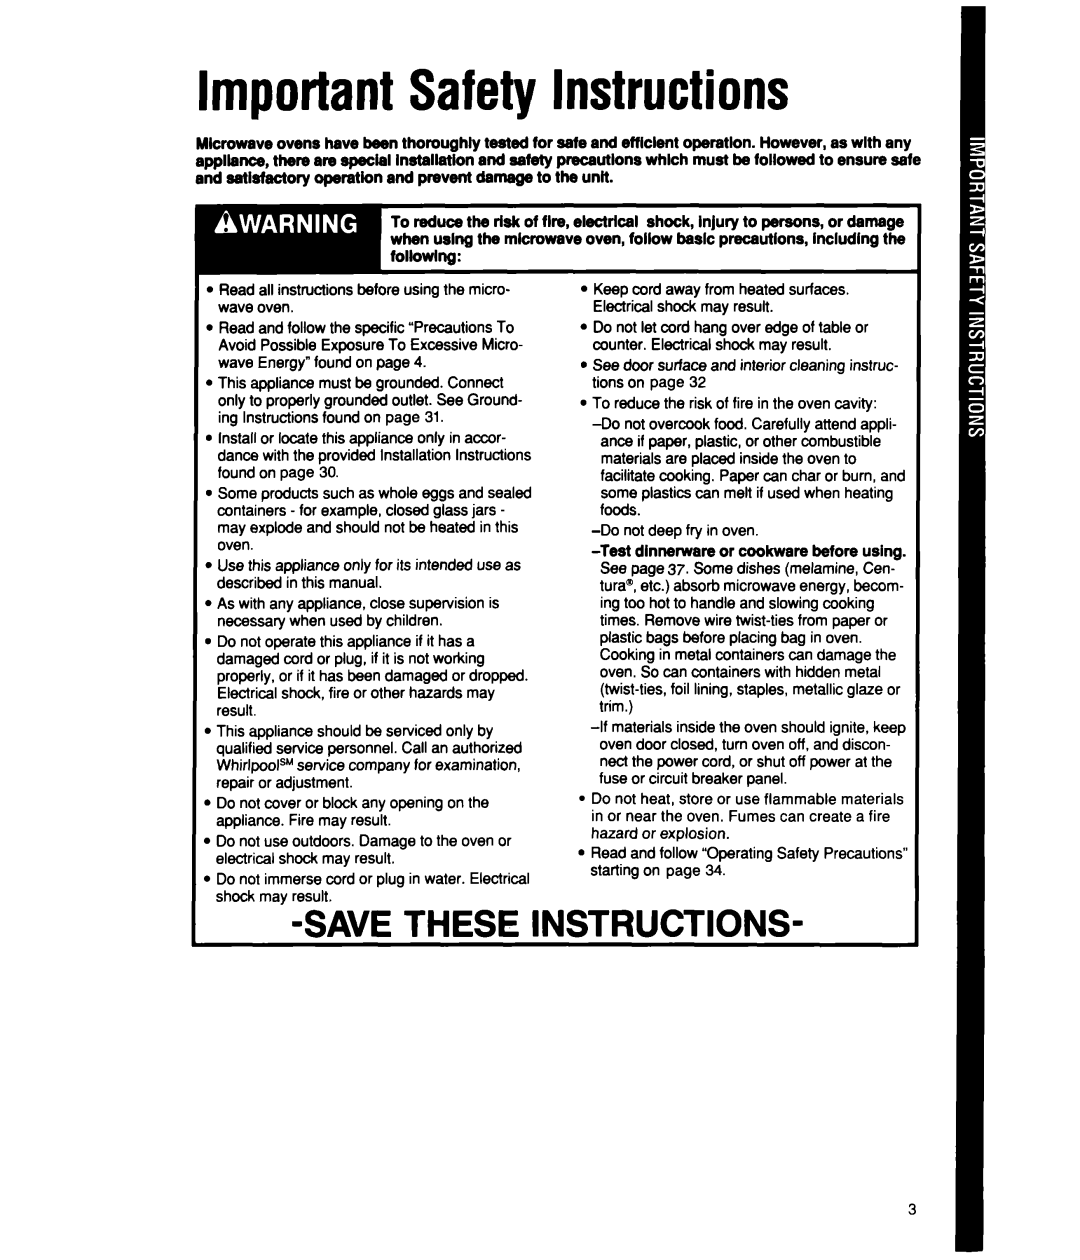 Whirlpool MT2150XW manual ImportantSafety Instructions, Savethese Instructions 